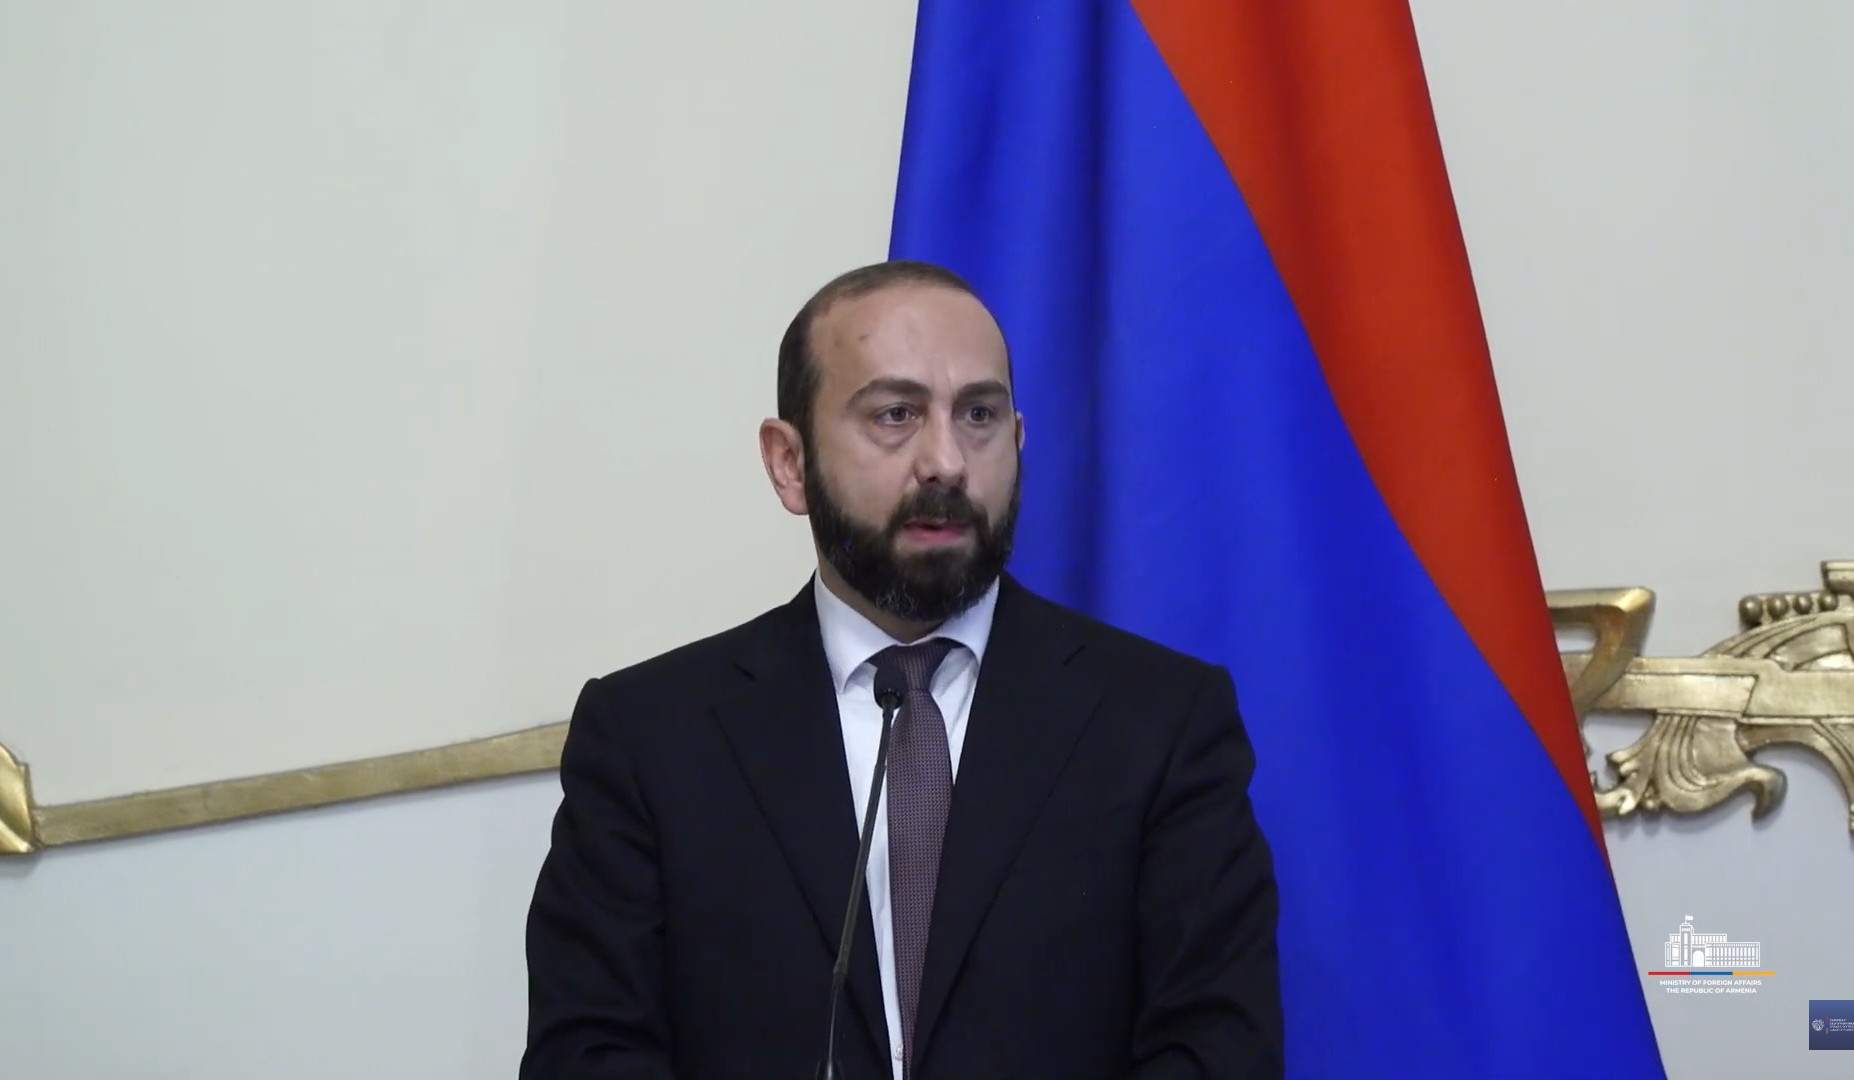 New, artificial obstacles are sometimes created to prolong the process: Mirzoyan on signing peace treaty